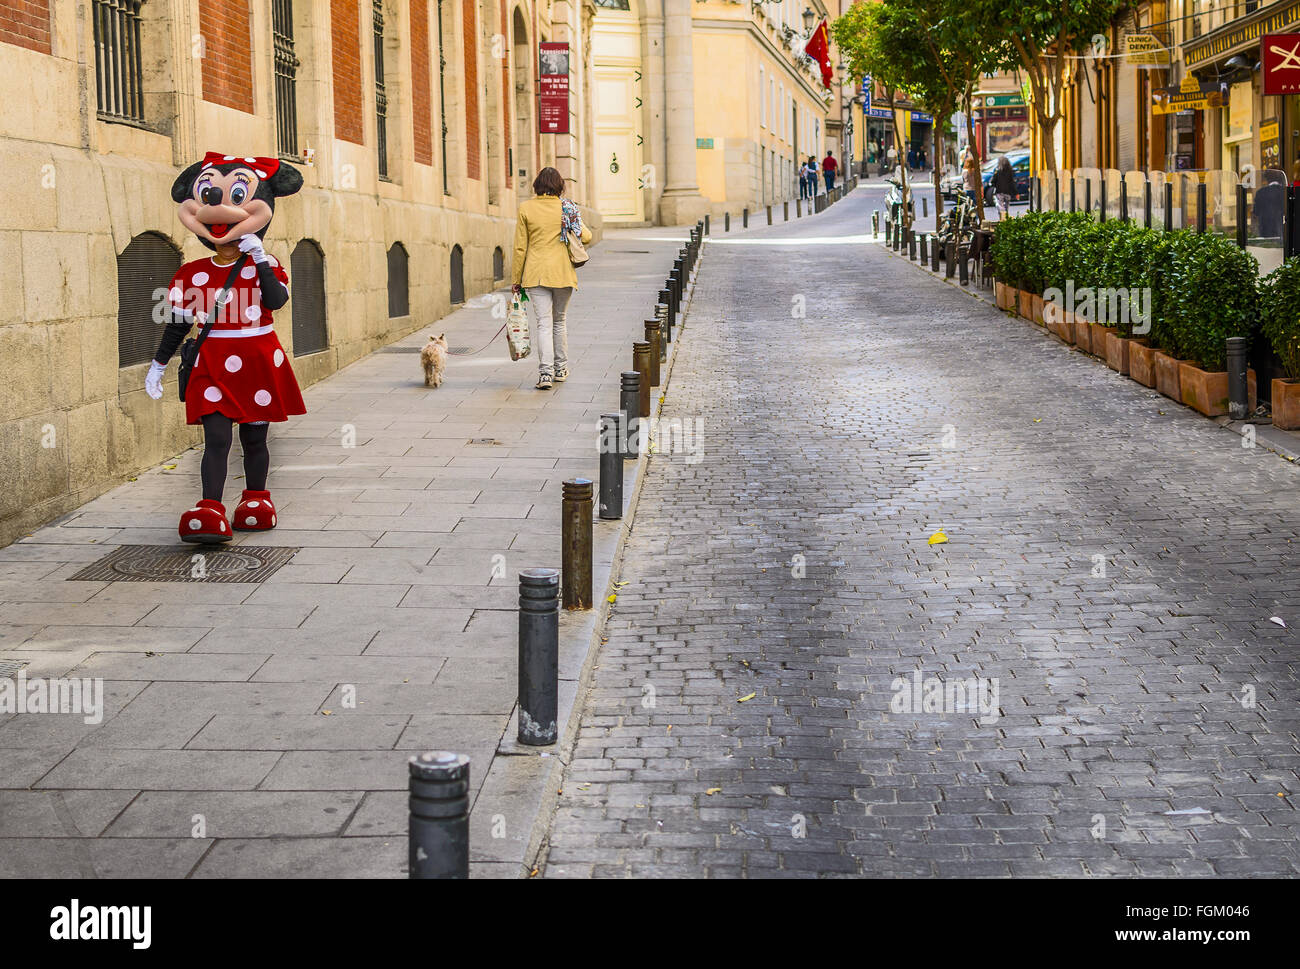 View of a disguise mouse in a central street of Madrid city, Spain Stock Photo